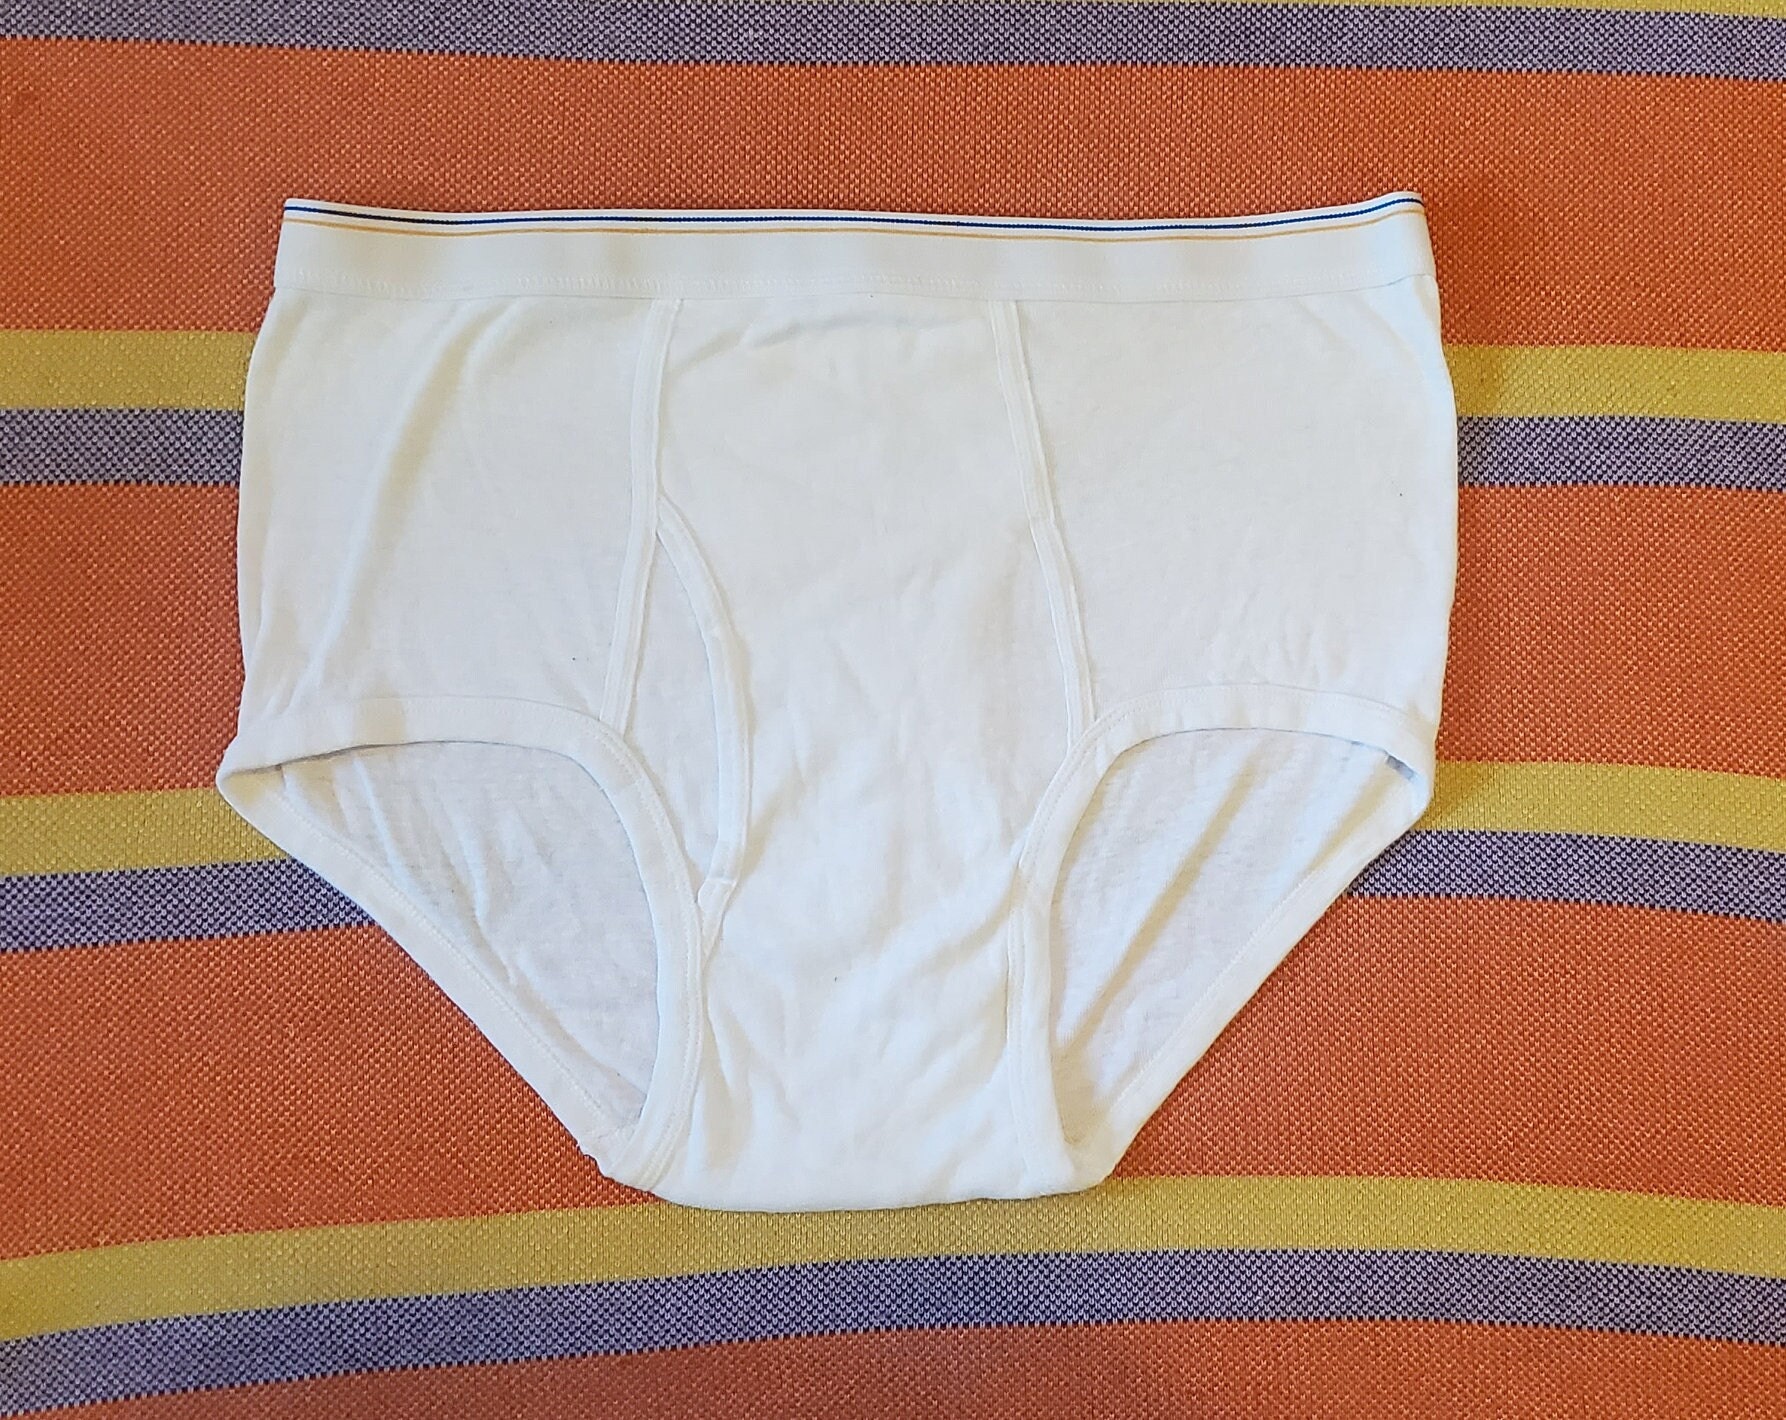 2 Vintage Fruit Of The Loom 2 Blue stripes White Briefs Size XL Extra Large.